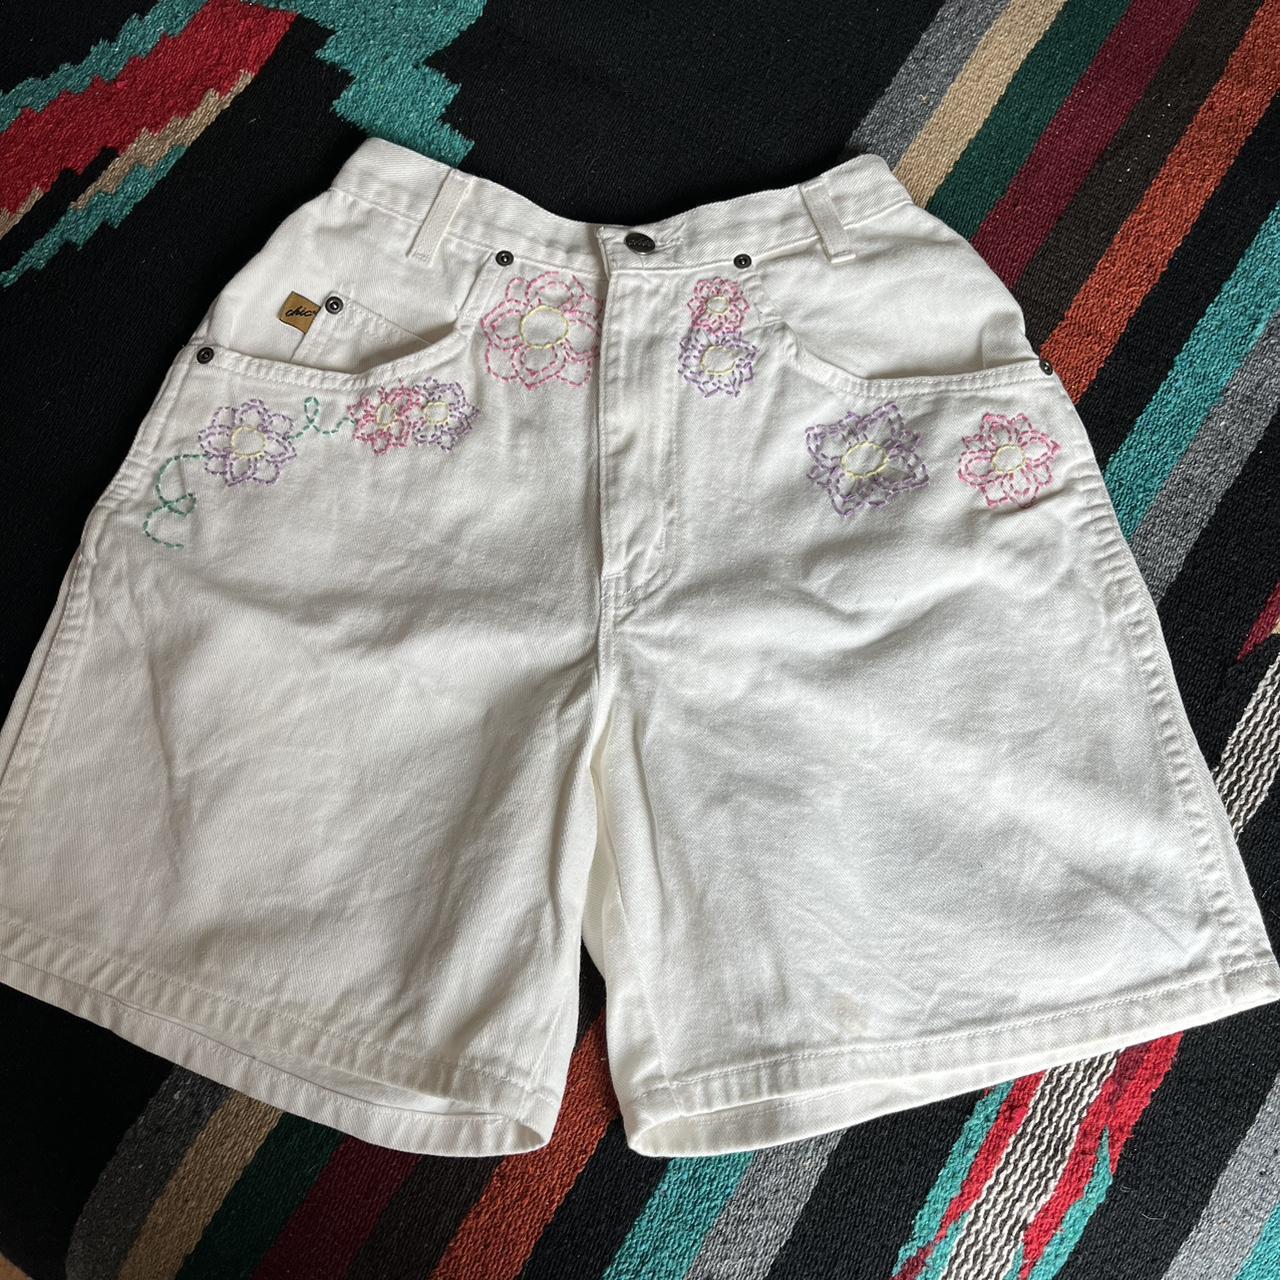 Chic Women's White and Pink Shorts